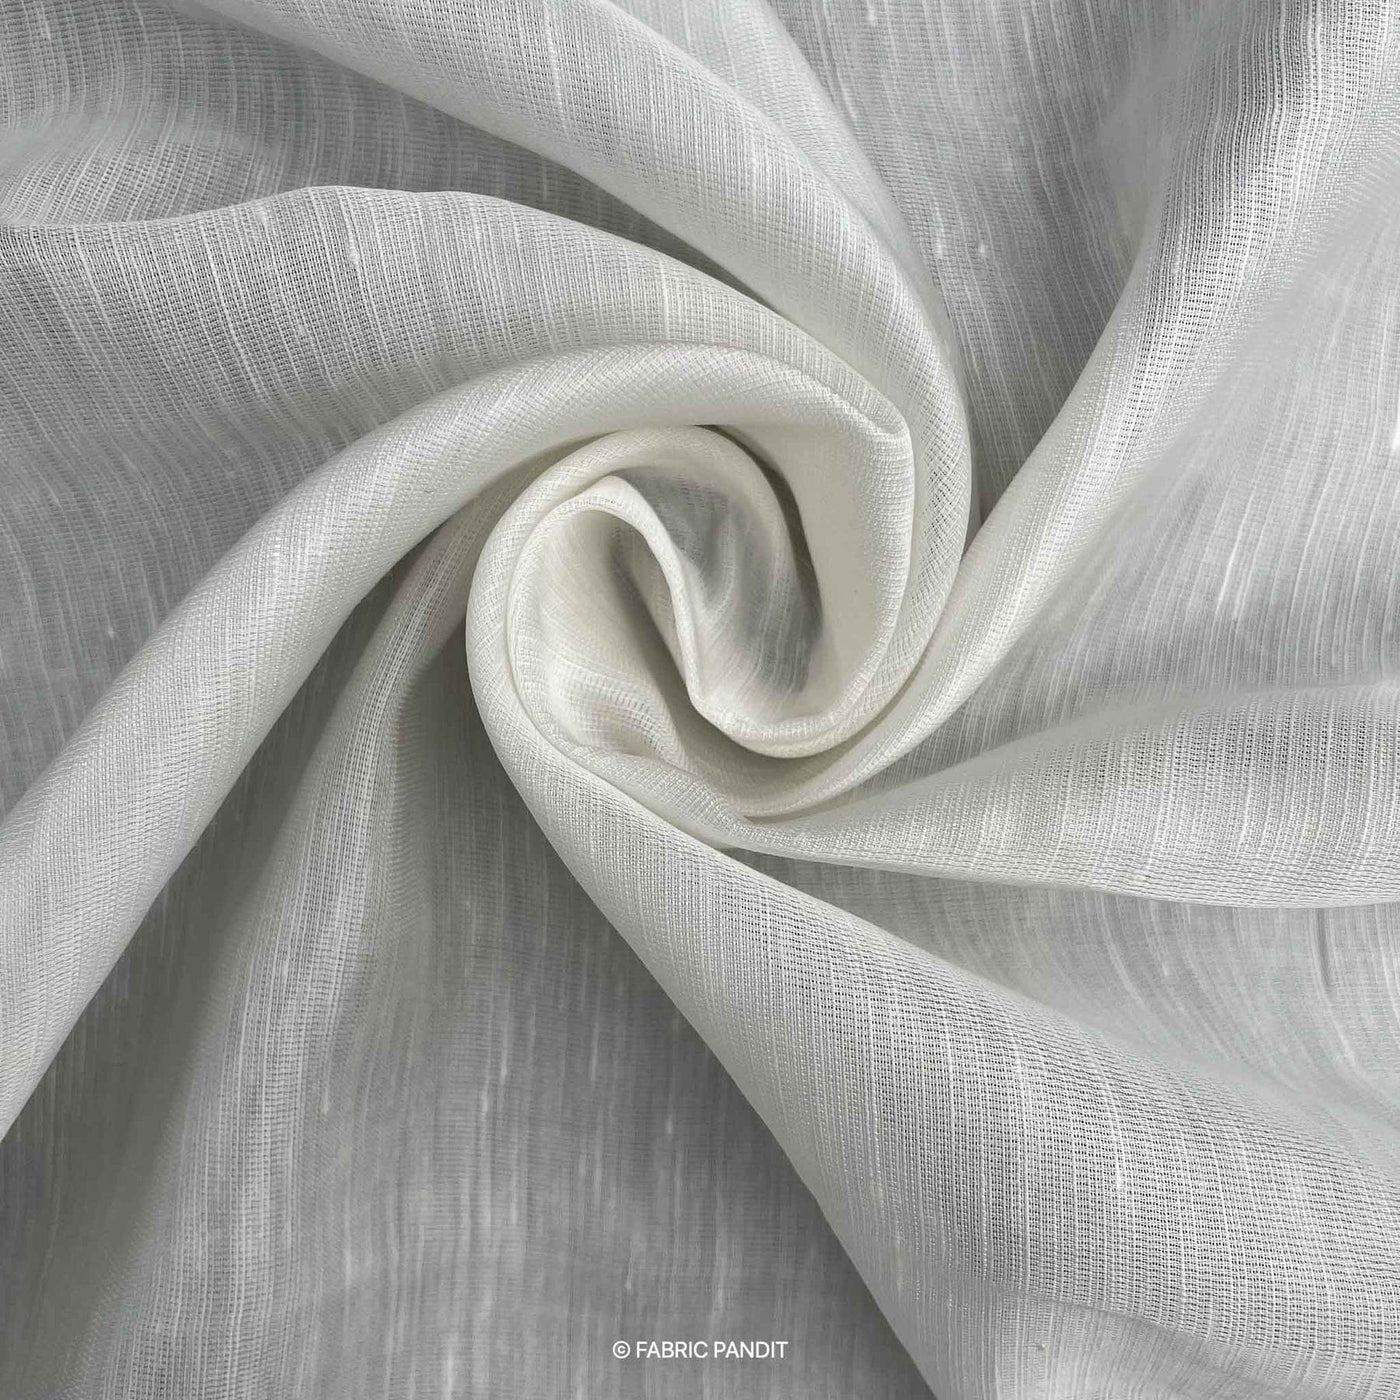 Fabric Pandit Fabric White Dyeable Pure Linen Satin Plain Fabric (Width 44 inches, 133 Gms)